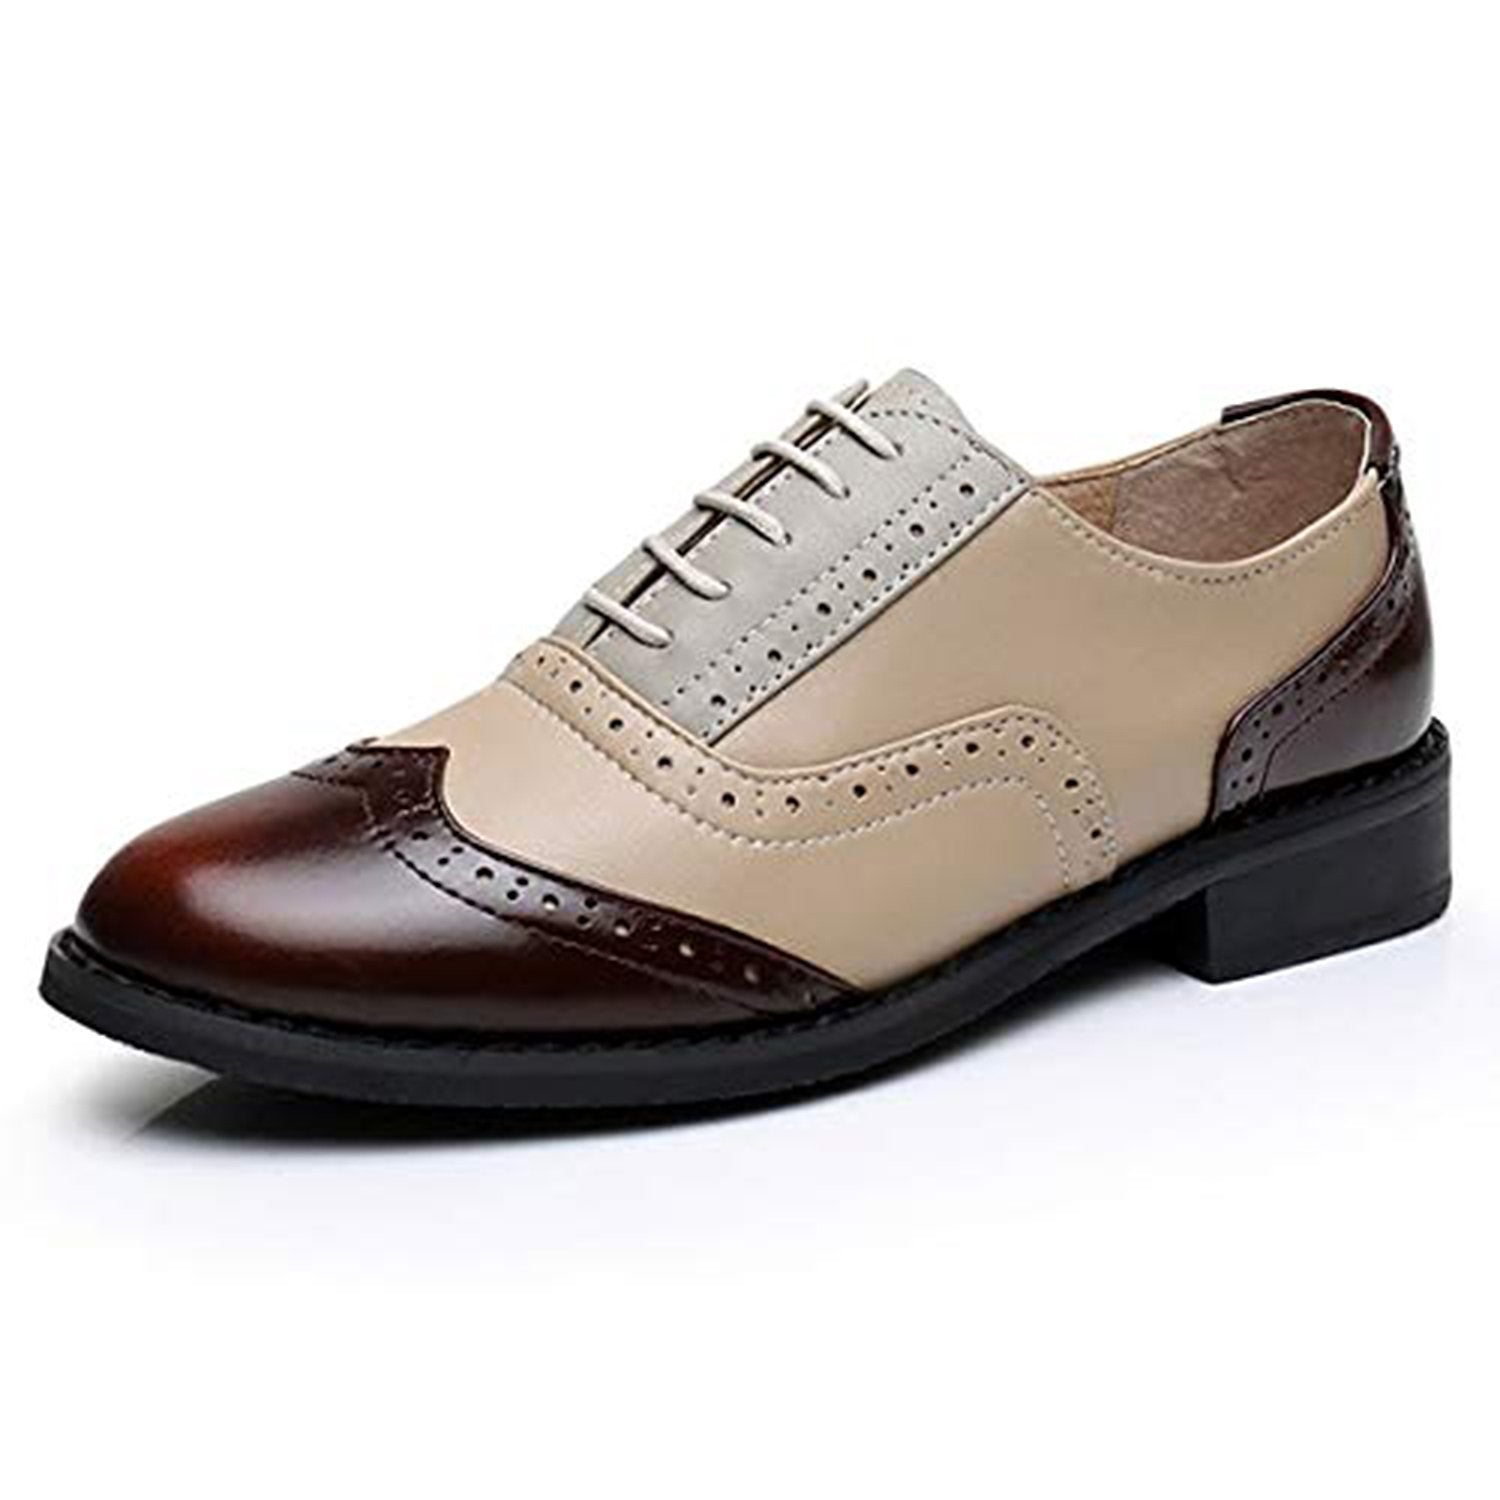 Classical-Leather-Wing-up-Brogues-Flat-Lace-up-Oxford-Shoes-Loafers